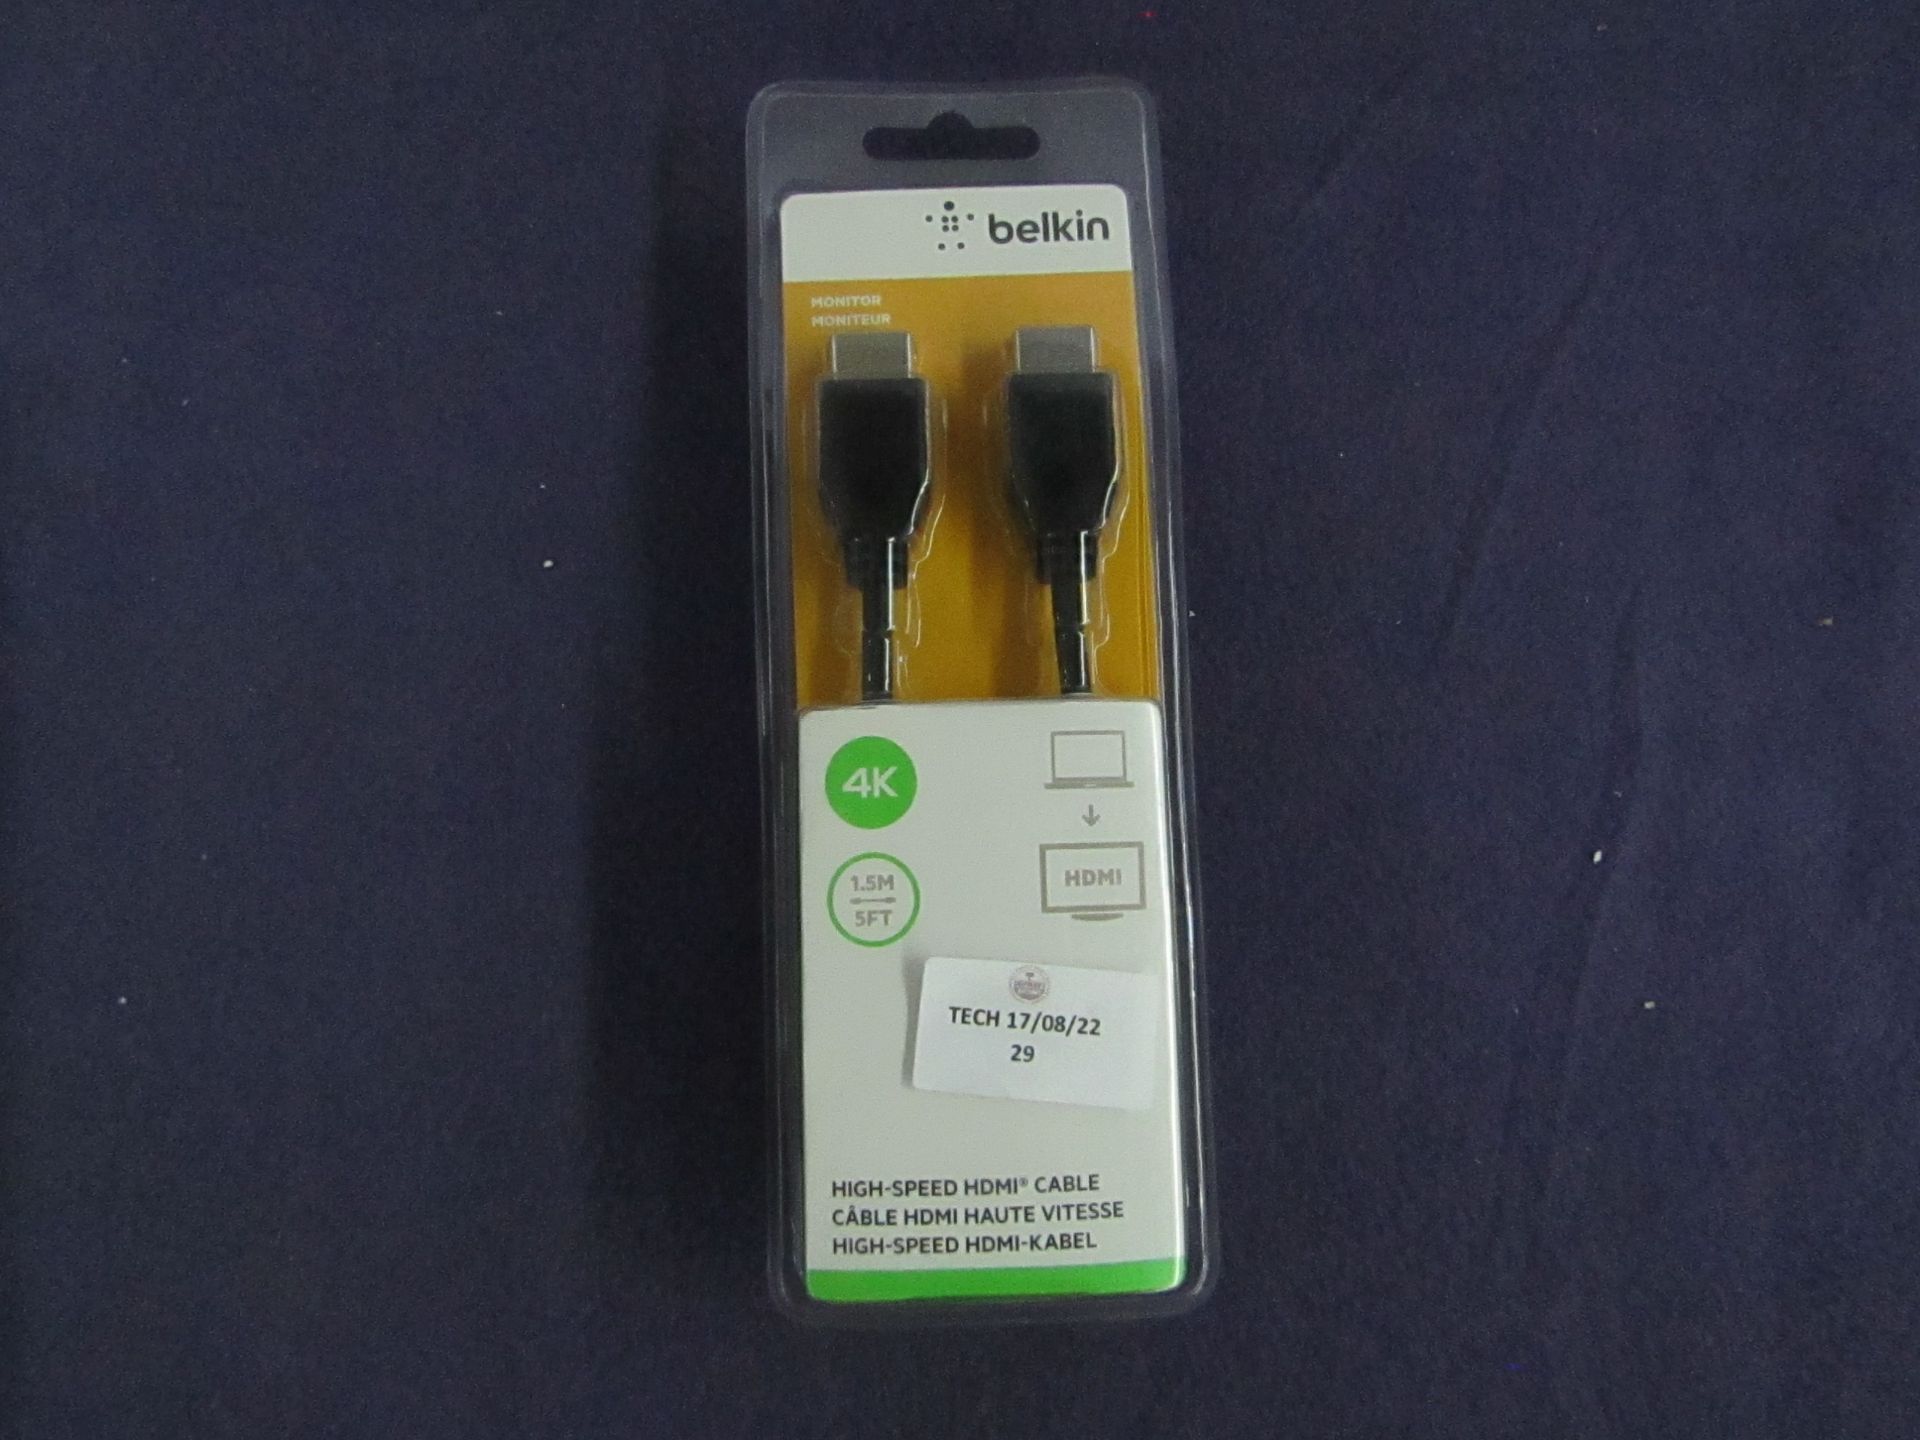 Belkin - High-Speed HDMI Cable - 1.5m - Good Condition & Packaged.